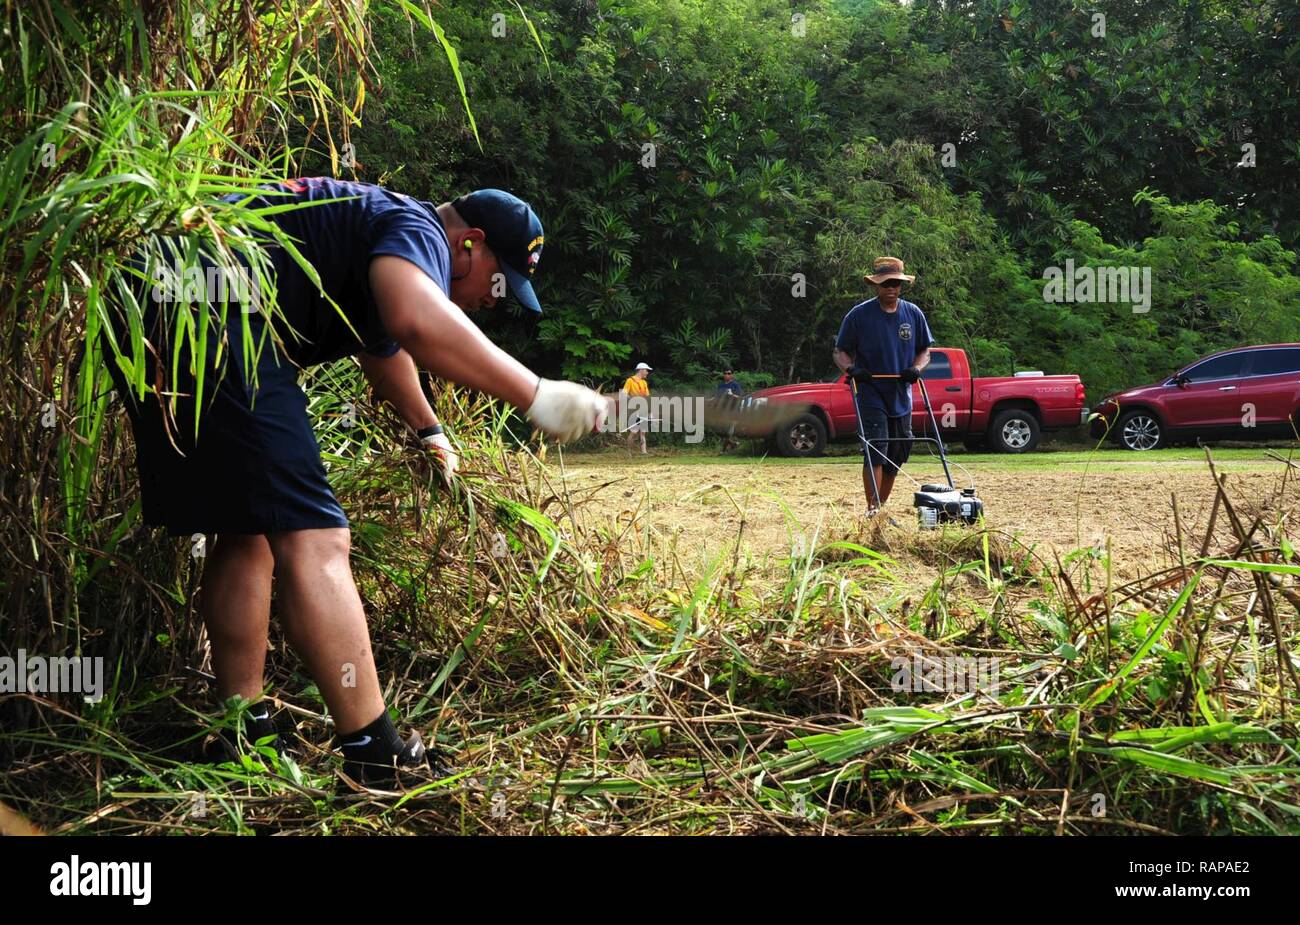 PITI, Guam (Feb. 25, 2017) – Boatswain’s Mate 1st Class Francisco Fuenteshernandez, native of Elmhurst, N.Y., and Master Chief Machinist’s Mate David Ford, native of Belcher, La., both assigned to the submarine tender USS frank Cable (AS 40), cut the grass around the Atantano Shrine in Piti, Guam Feb. 25, during a CPO 365 community relations project.  Frank Cable is forward deployed to the island of Guam and conducts maintenance and support of submarines and surface vessels deployed to the U.S. 5th and 7th Fleet area of operations. Stock Photo